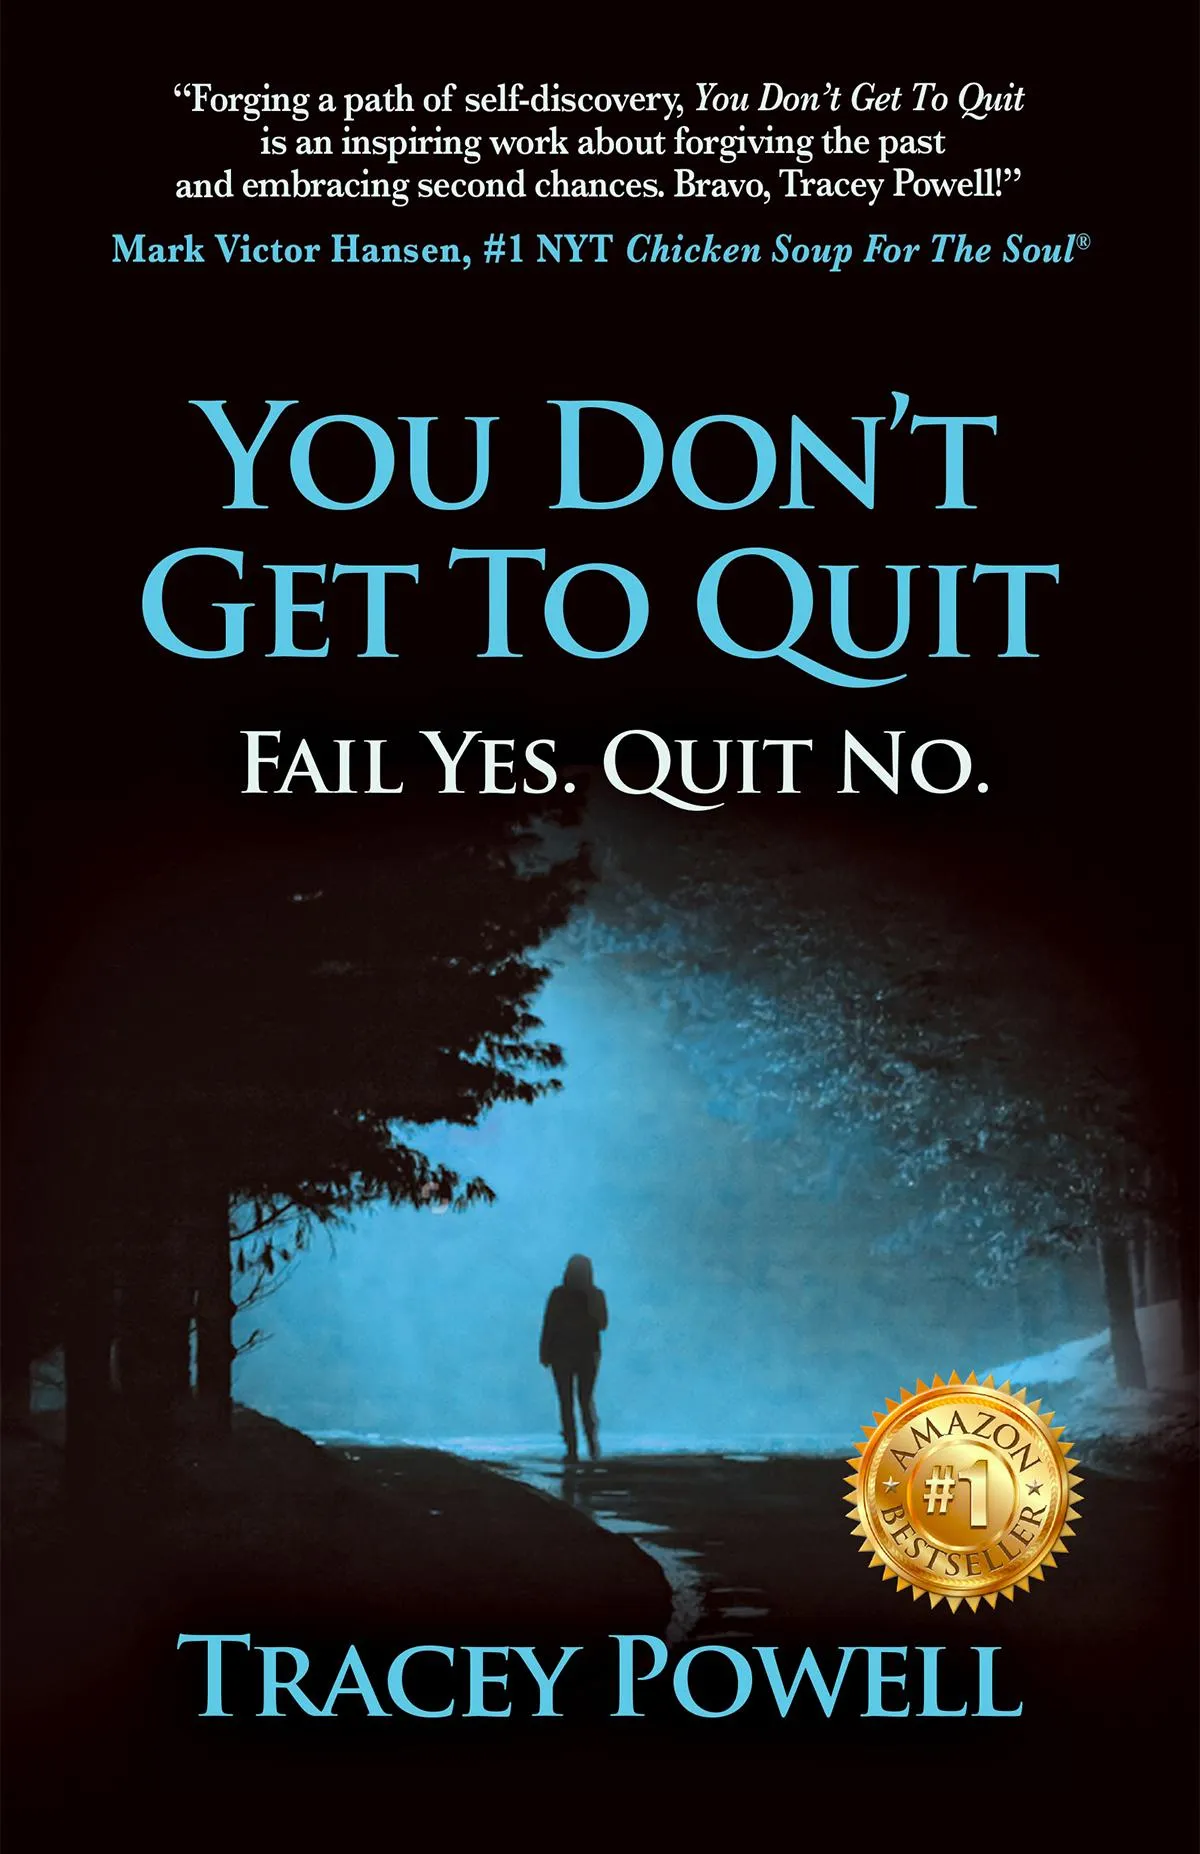 You Don't Get to Quit, Fail Yes. Quit No. by Tracey Powell